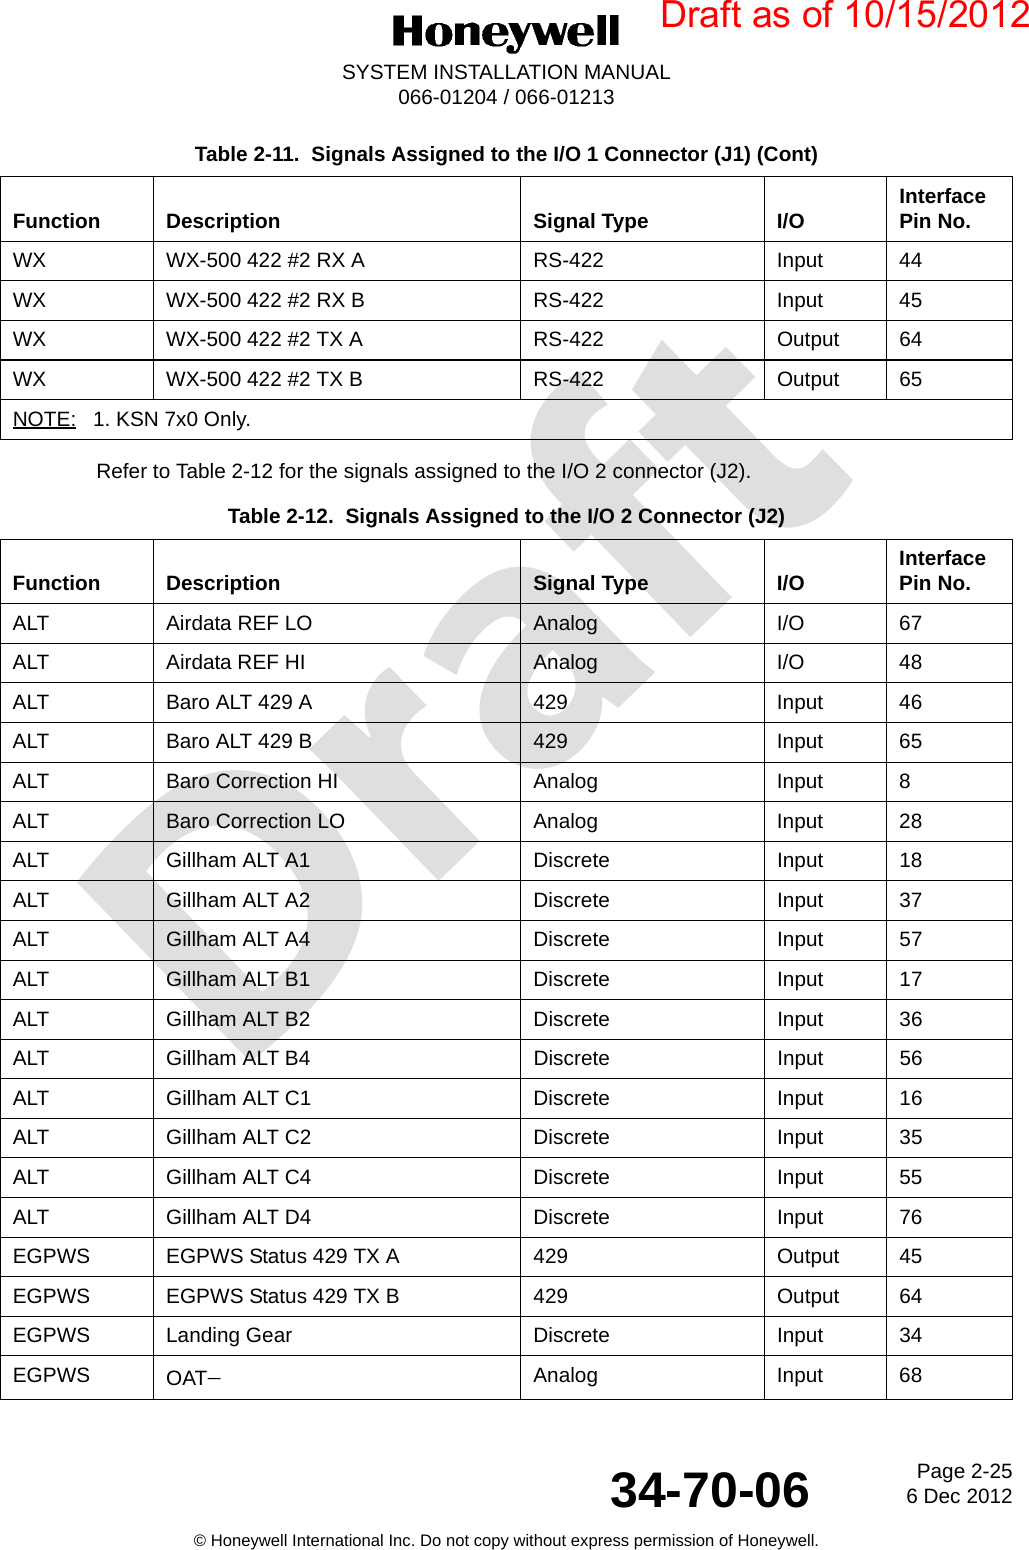 DraftPage 2-256 Dec 201234-70-06SYSTEM INSTALLATION MANUAL066-01204 / 066-01213© Honeywell International Inc. Do not copy without express permission of Honeywell.Refer to Table 2-12 for the signals assigned to the I/O 2 connector (J2).WX WX-500 422 #2 RX A RS-422 Input 44WX WX-500 422 #2 RX B RS-422 Input 45WX WX-500 422 #2 TX A RS-422 Output 64WX WX-500 422 #2 TX B RS-422 Output 65NOTE: 1. KSN 7x0 Only.Table 2-12.  Signals Assigned to the I/O 2 Connector (J2) Function Description Signal Type I/O Interface Pin No.ALT Airdata REF LO Analog I/O 67ALT Airdata REF HI Analog I/O 48ALT Baro ALT 429 A 429 Input 46ALT Baro ALT 429 B 429 Input 65ALT Baro Correction HI Analog Input 8ALT Baro Correction LO Analog Input 28ALT Gillham ALT A1 Discrete Input 18ALT Gillham ALT A2 Discrete Input 37ALT Gillham ALT A4 Discrete Input 57ALT Gillham ALT B1 Discrete Input 17ALT Gillham ALT B2 Discrete Input 36ALT Gillham ALT B4 Discrete Input 56ALT Gillham ALT C1 Discrete Input 16ALT Gillham ALT C2 Discrete Input 35ALT Gillham ALT C4 Discrete Input 55ALT Gillham ALT D4 Discrete Input 76EGPWS EGPWS Status 429 TX A 429 Output 45EGPWS EGPWS Status 429 TX B 429 Output 64EGPWS Landing Gear Discrete Input 34EGPWS OATAnalog Input 68Table 2-11.  Signals Assigned to the I/O 1 Connector (J1) (Cont)Function Description Signal Type I/O Interface Pin No.Draft as of 10/15/2012